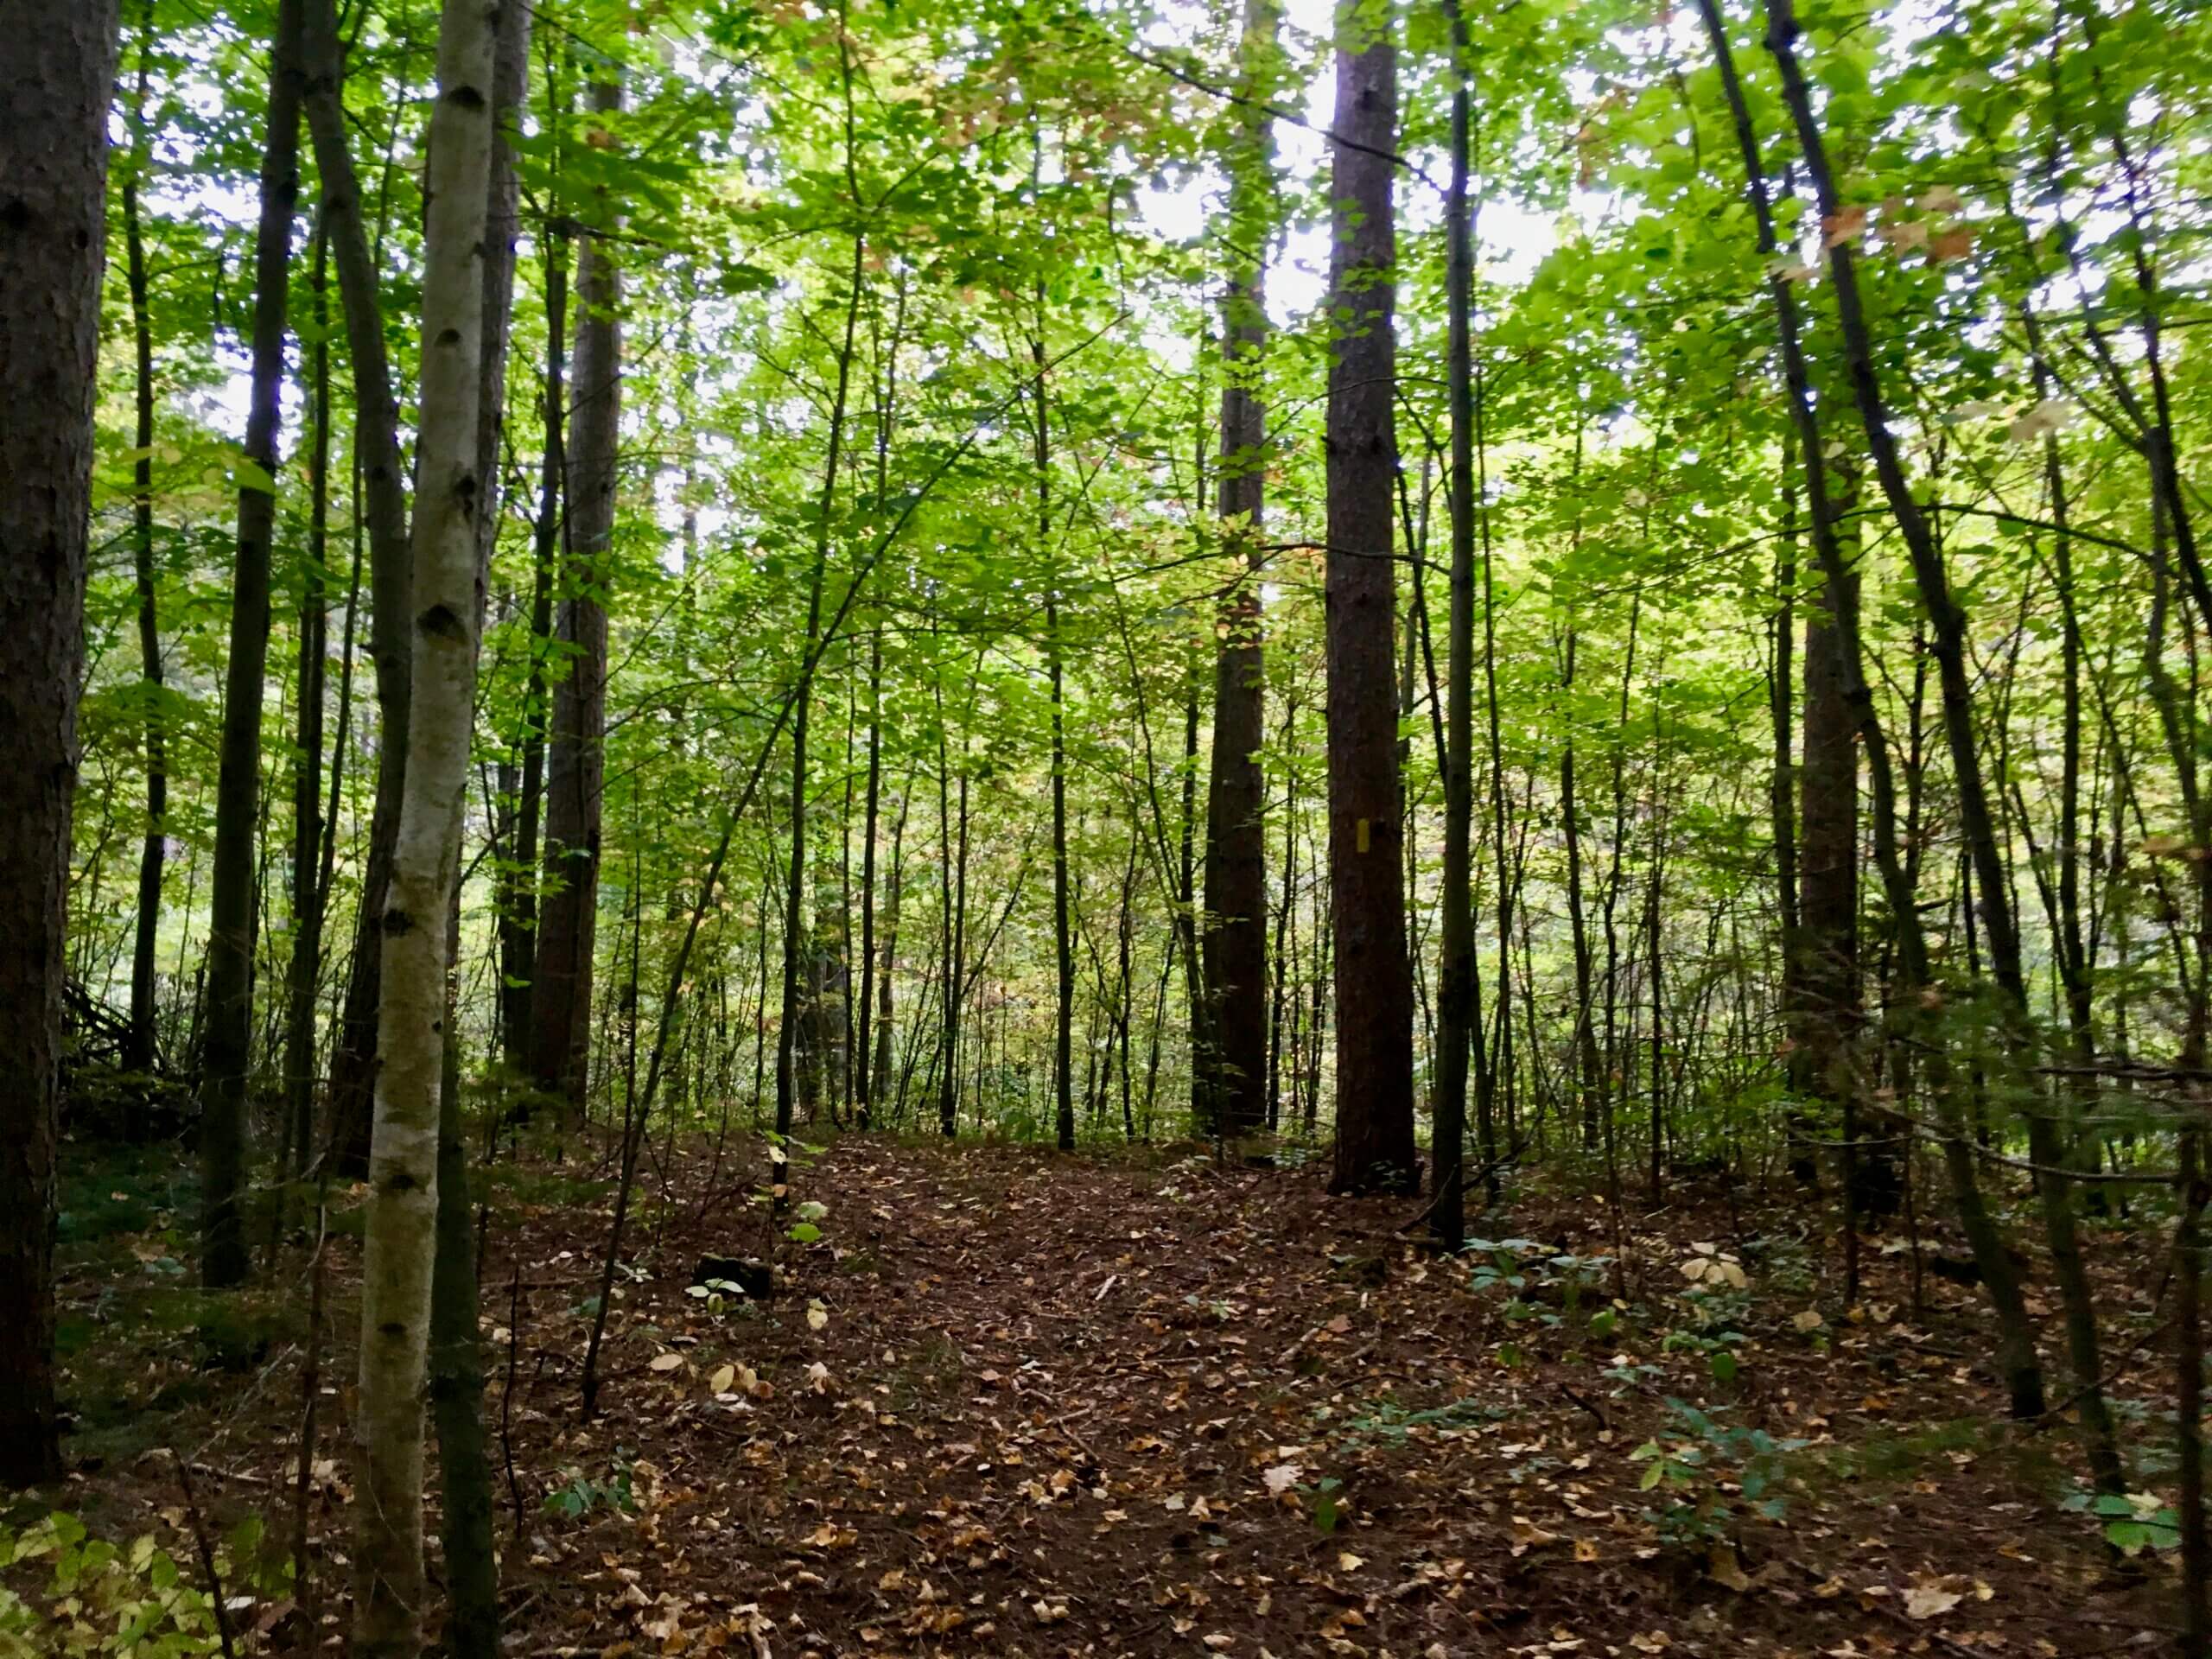 Leaf covered trail running through a stand of skinny trees with green leaves.